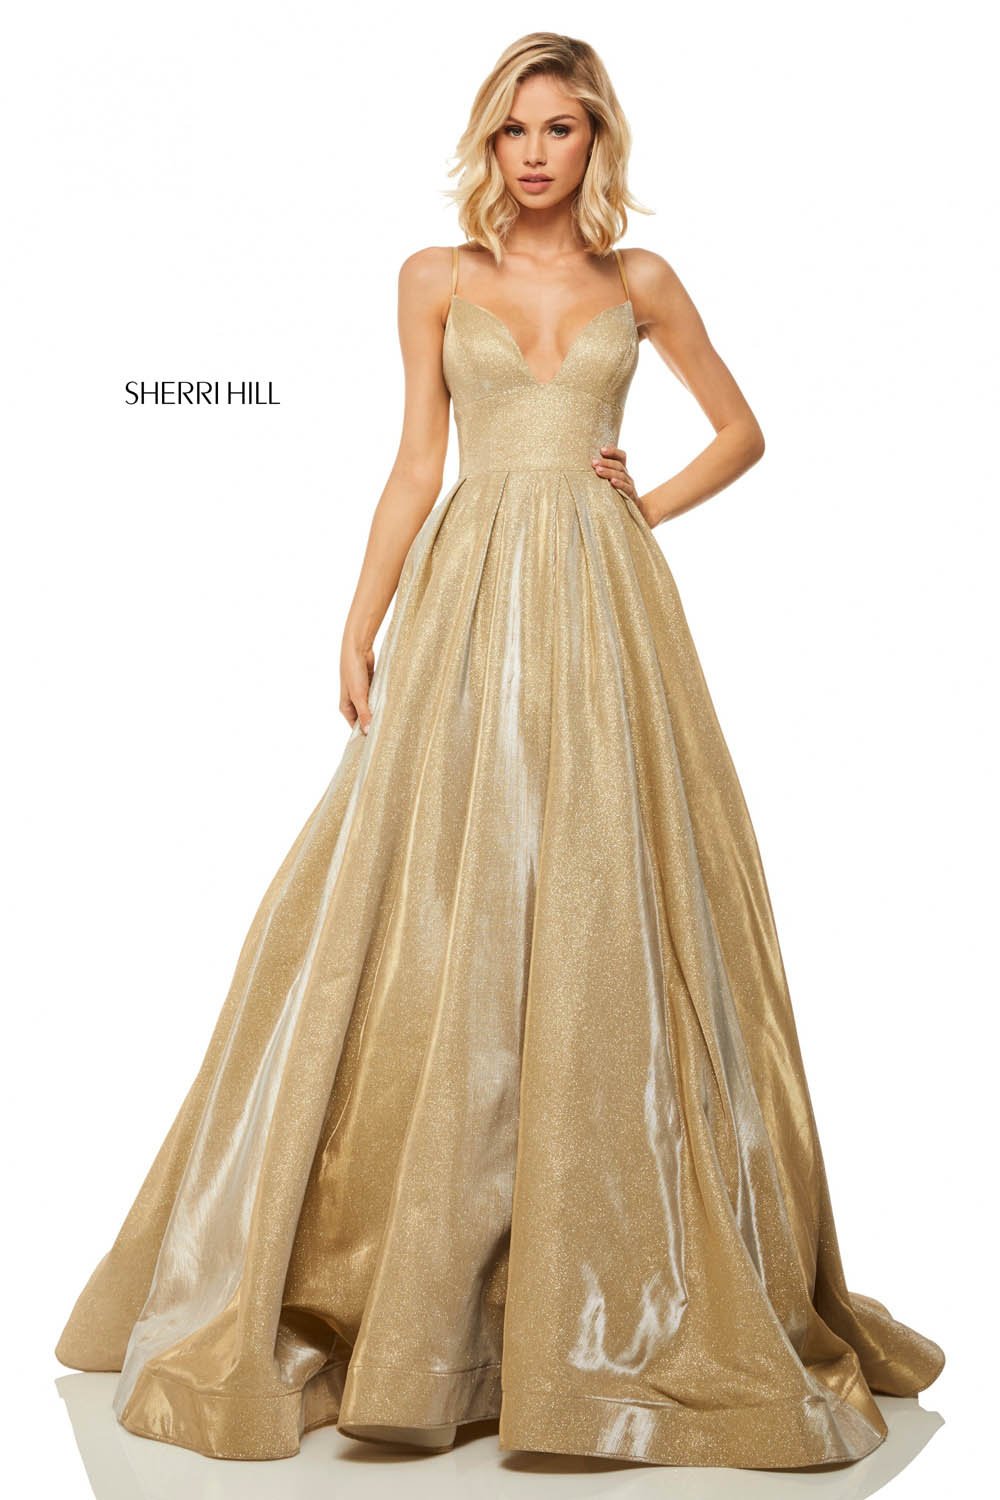 Sherri Hill 52832 dress images in these colors: Gold.